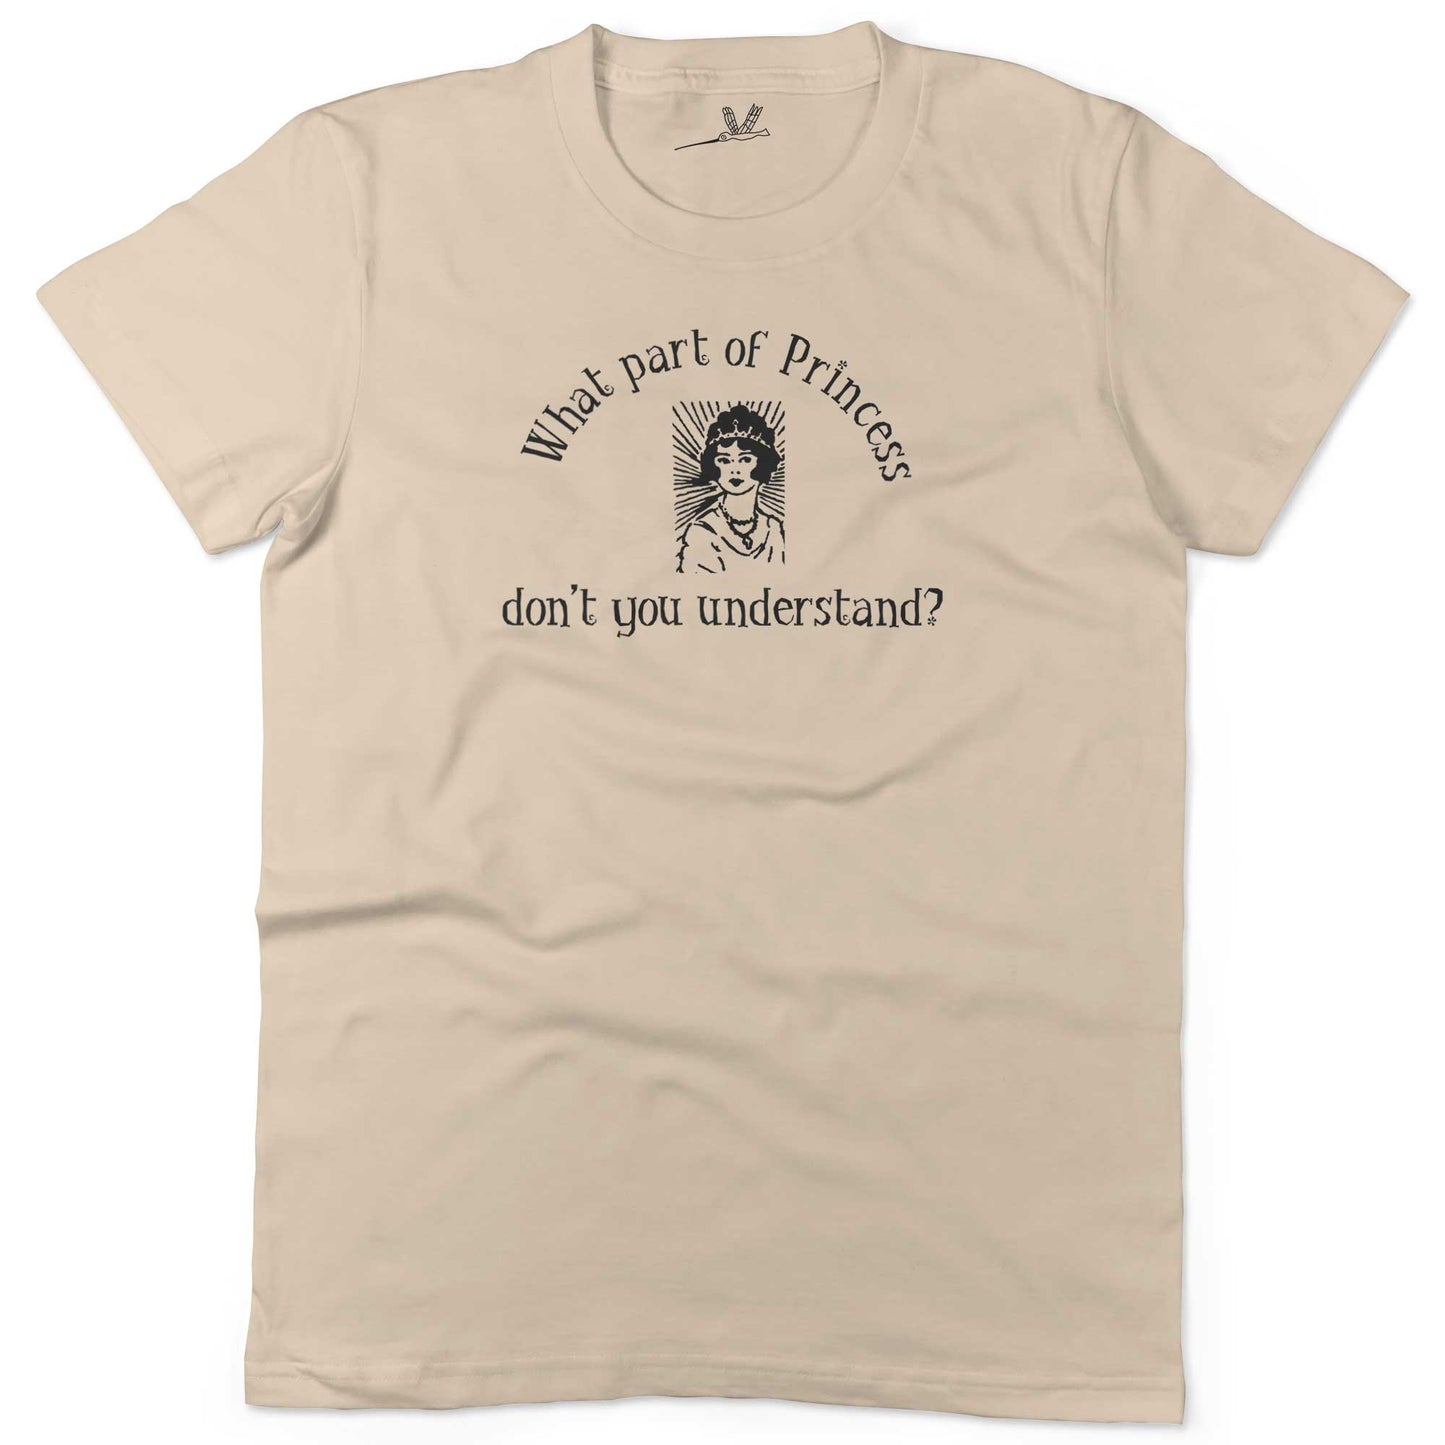 What Part Of Princess Don't You Understand? Unisex Or Women's Cotton T-shirt-Organic Natural-Woman